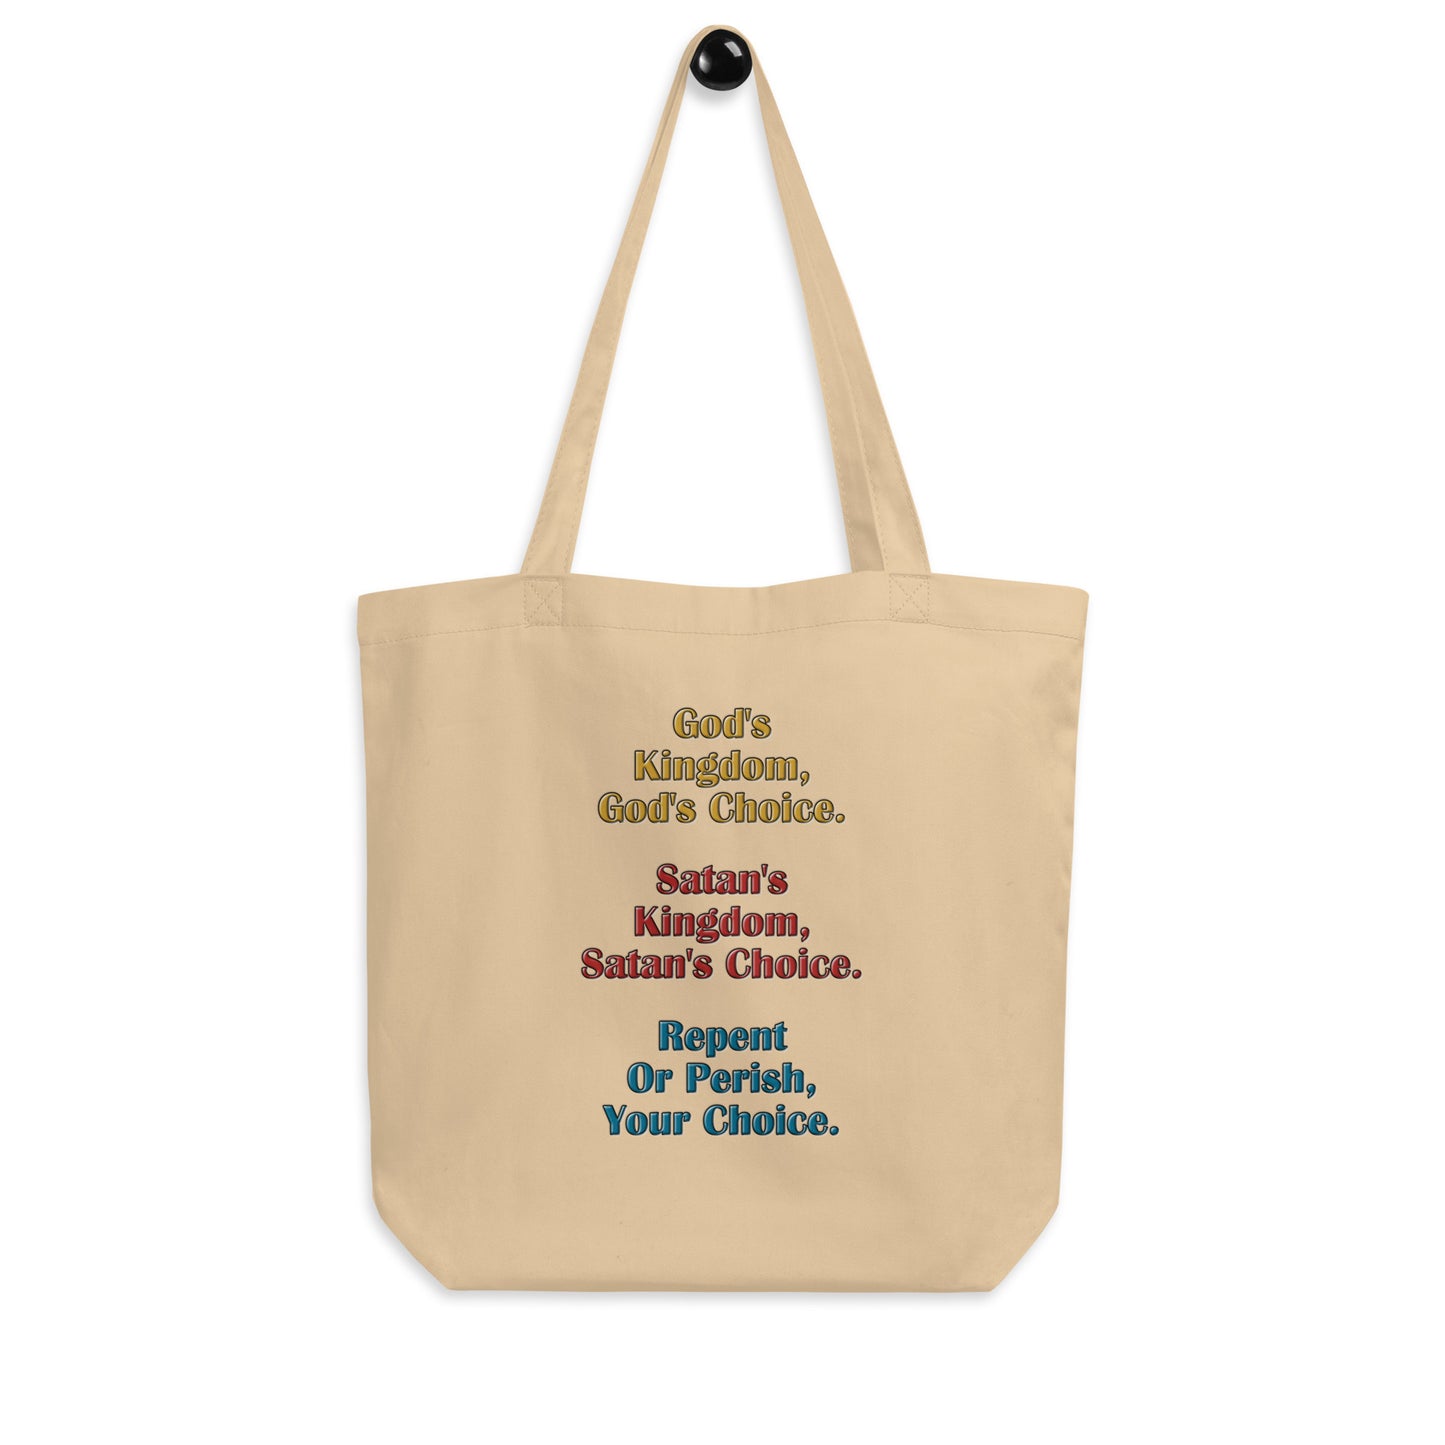 A012 Tote – Eco Tote Bag Featuring the Text “God’s Kingdom, God’s Choice – Satan’s Kingdom, Satan’s Choice – Repent or Perish, Your Choice.”